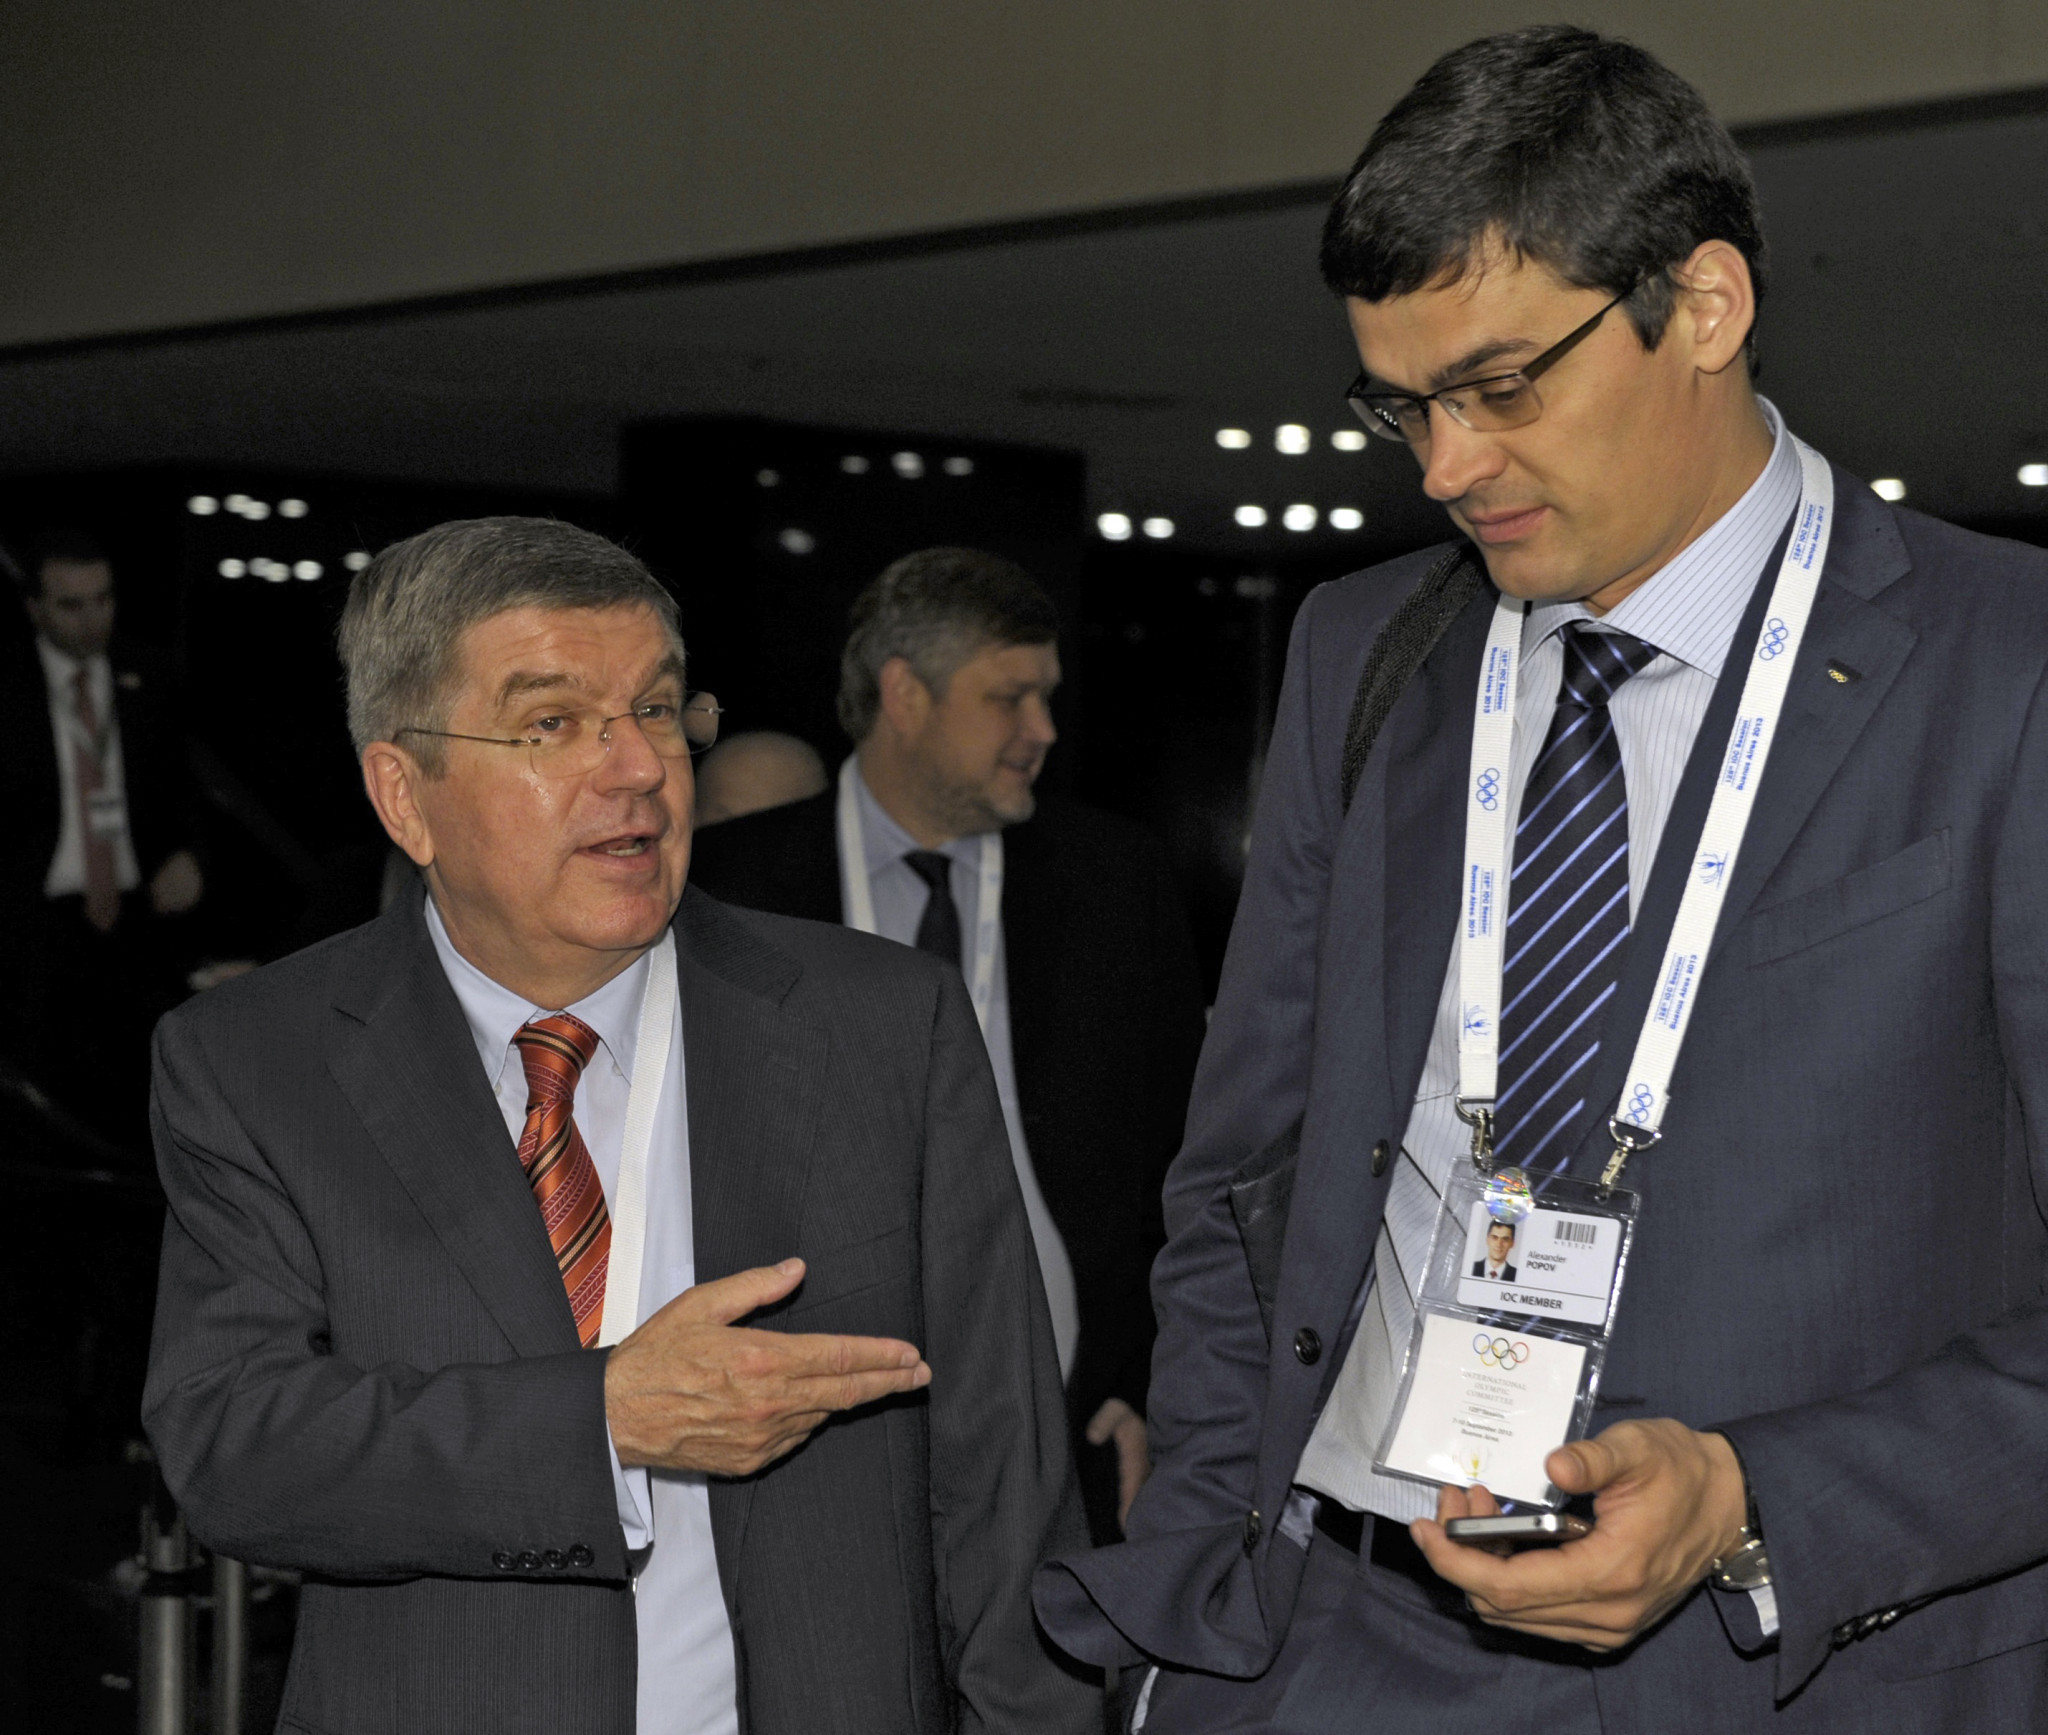 Alexander Popov, right, pictured with soon-to-be-elected IOC President Thomas Bach in September 2013 ©Getty Images